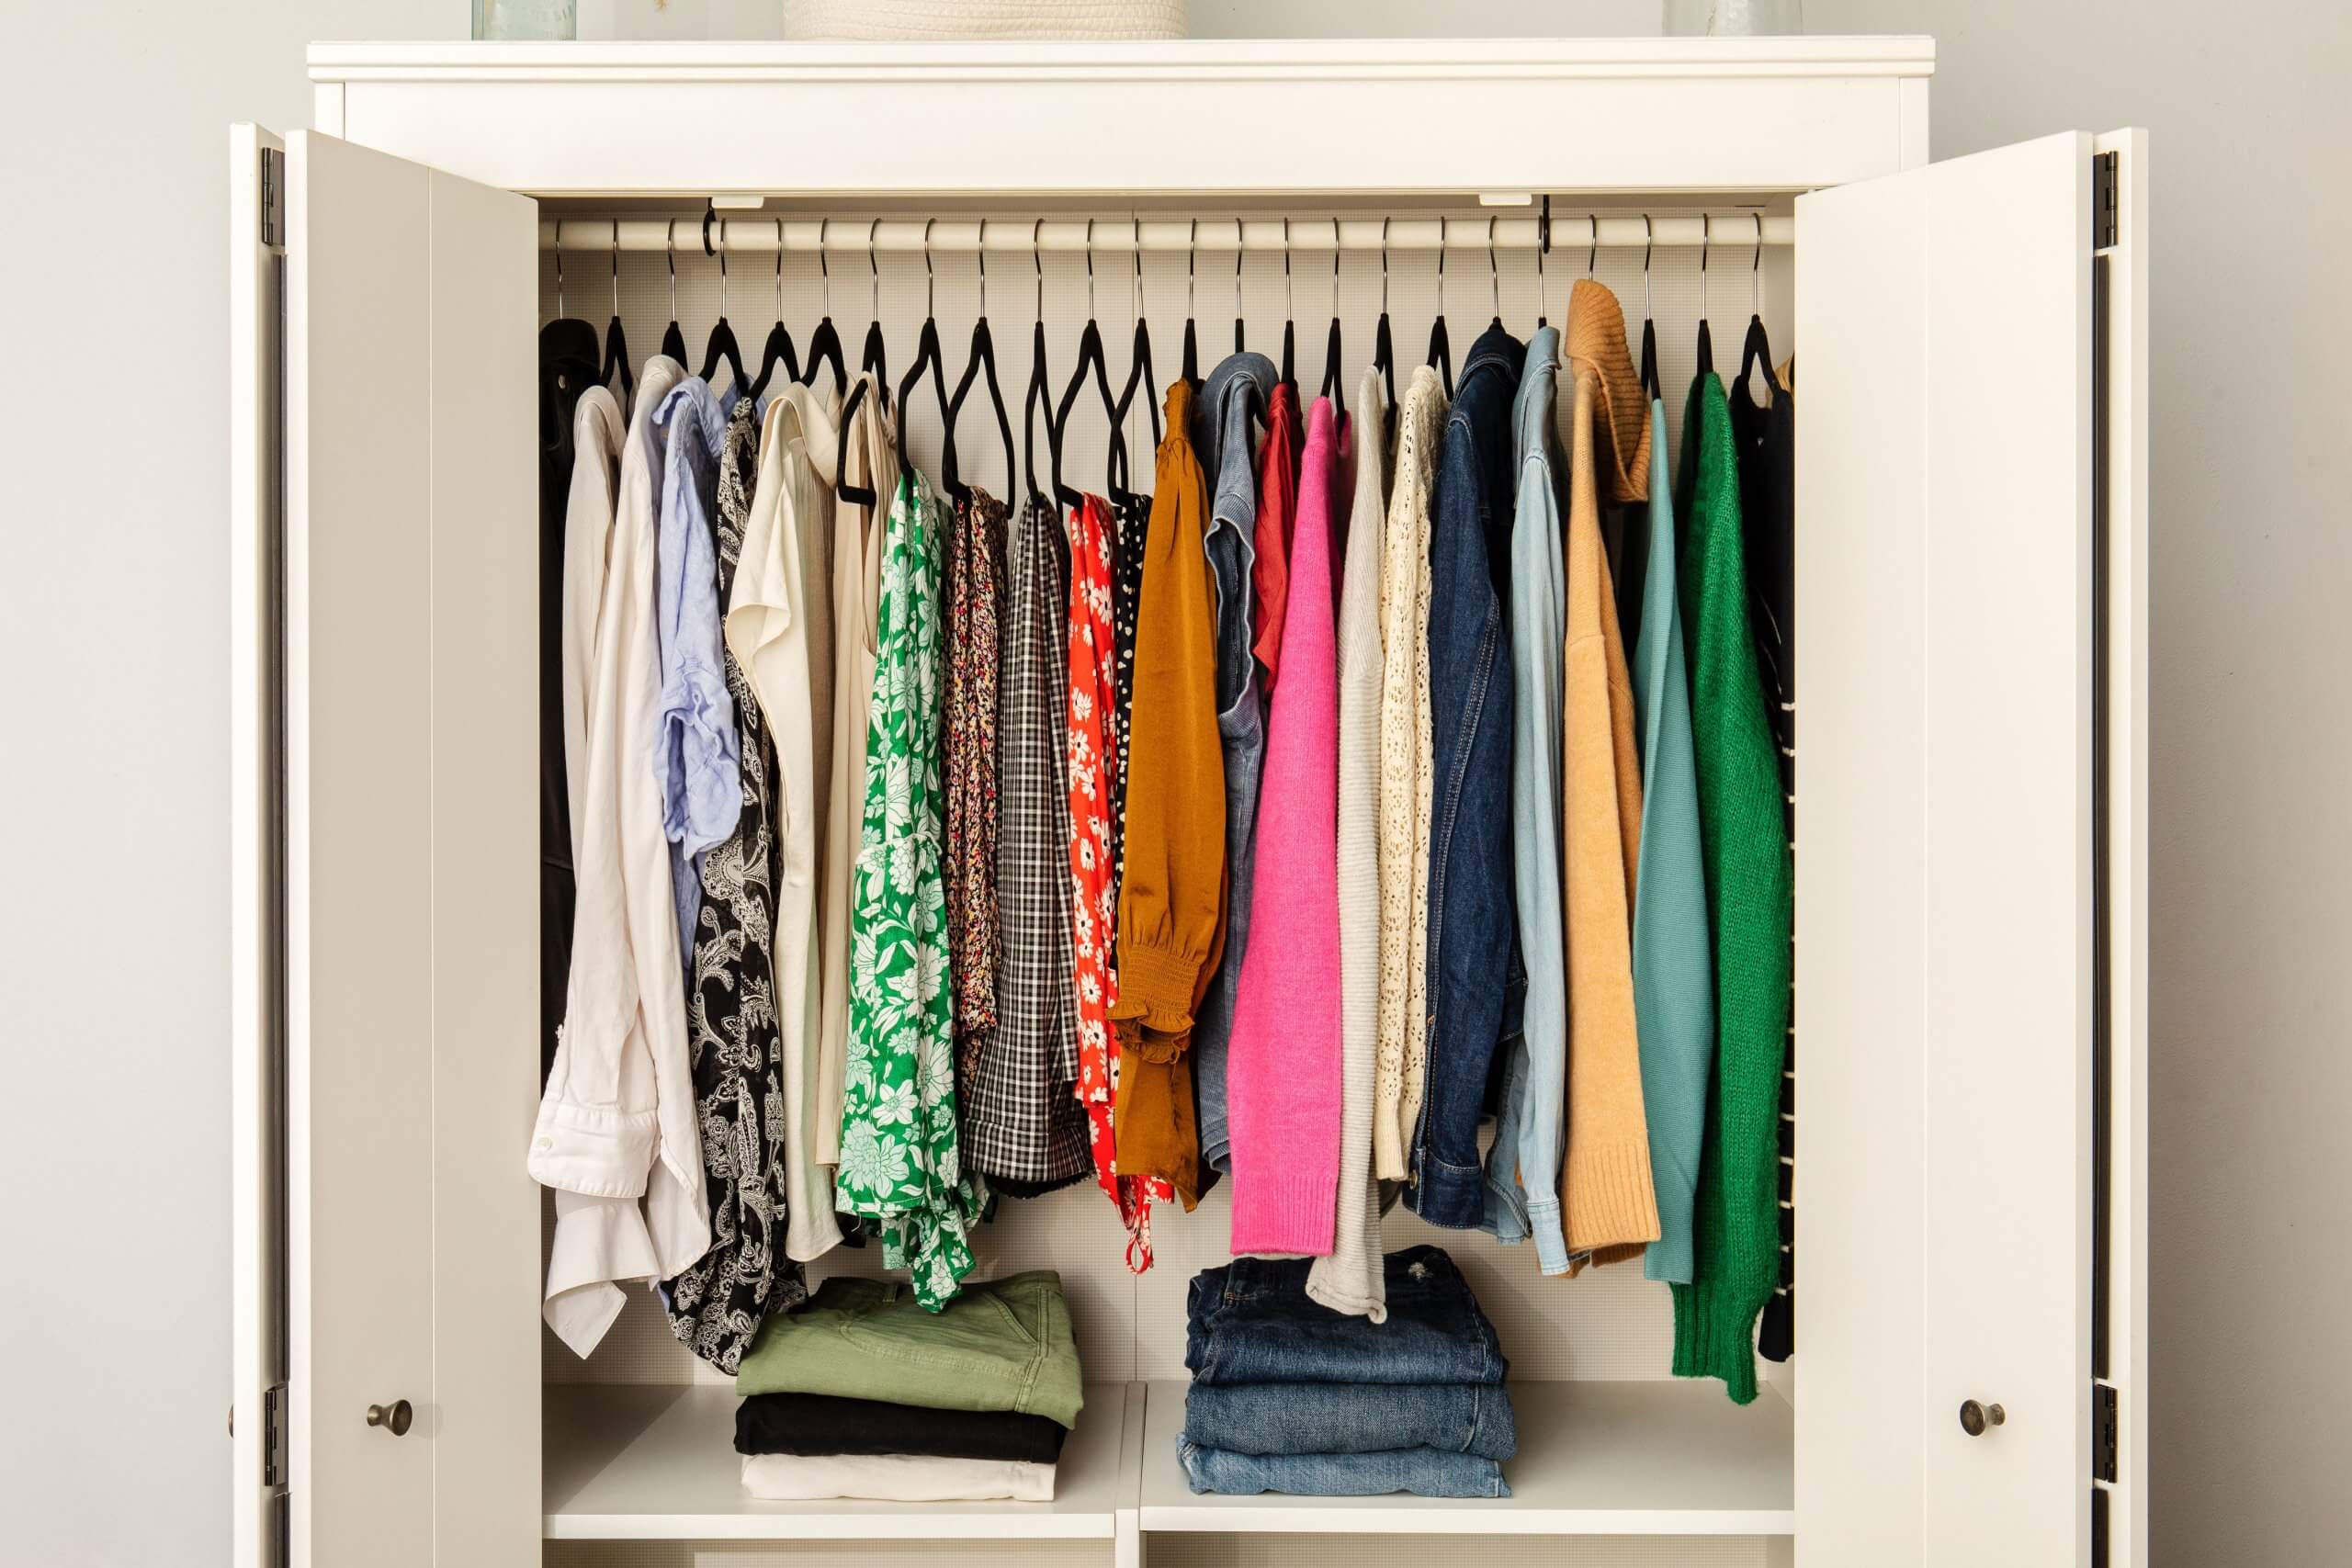 How to Organize Your Closet by Season